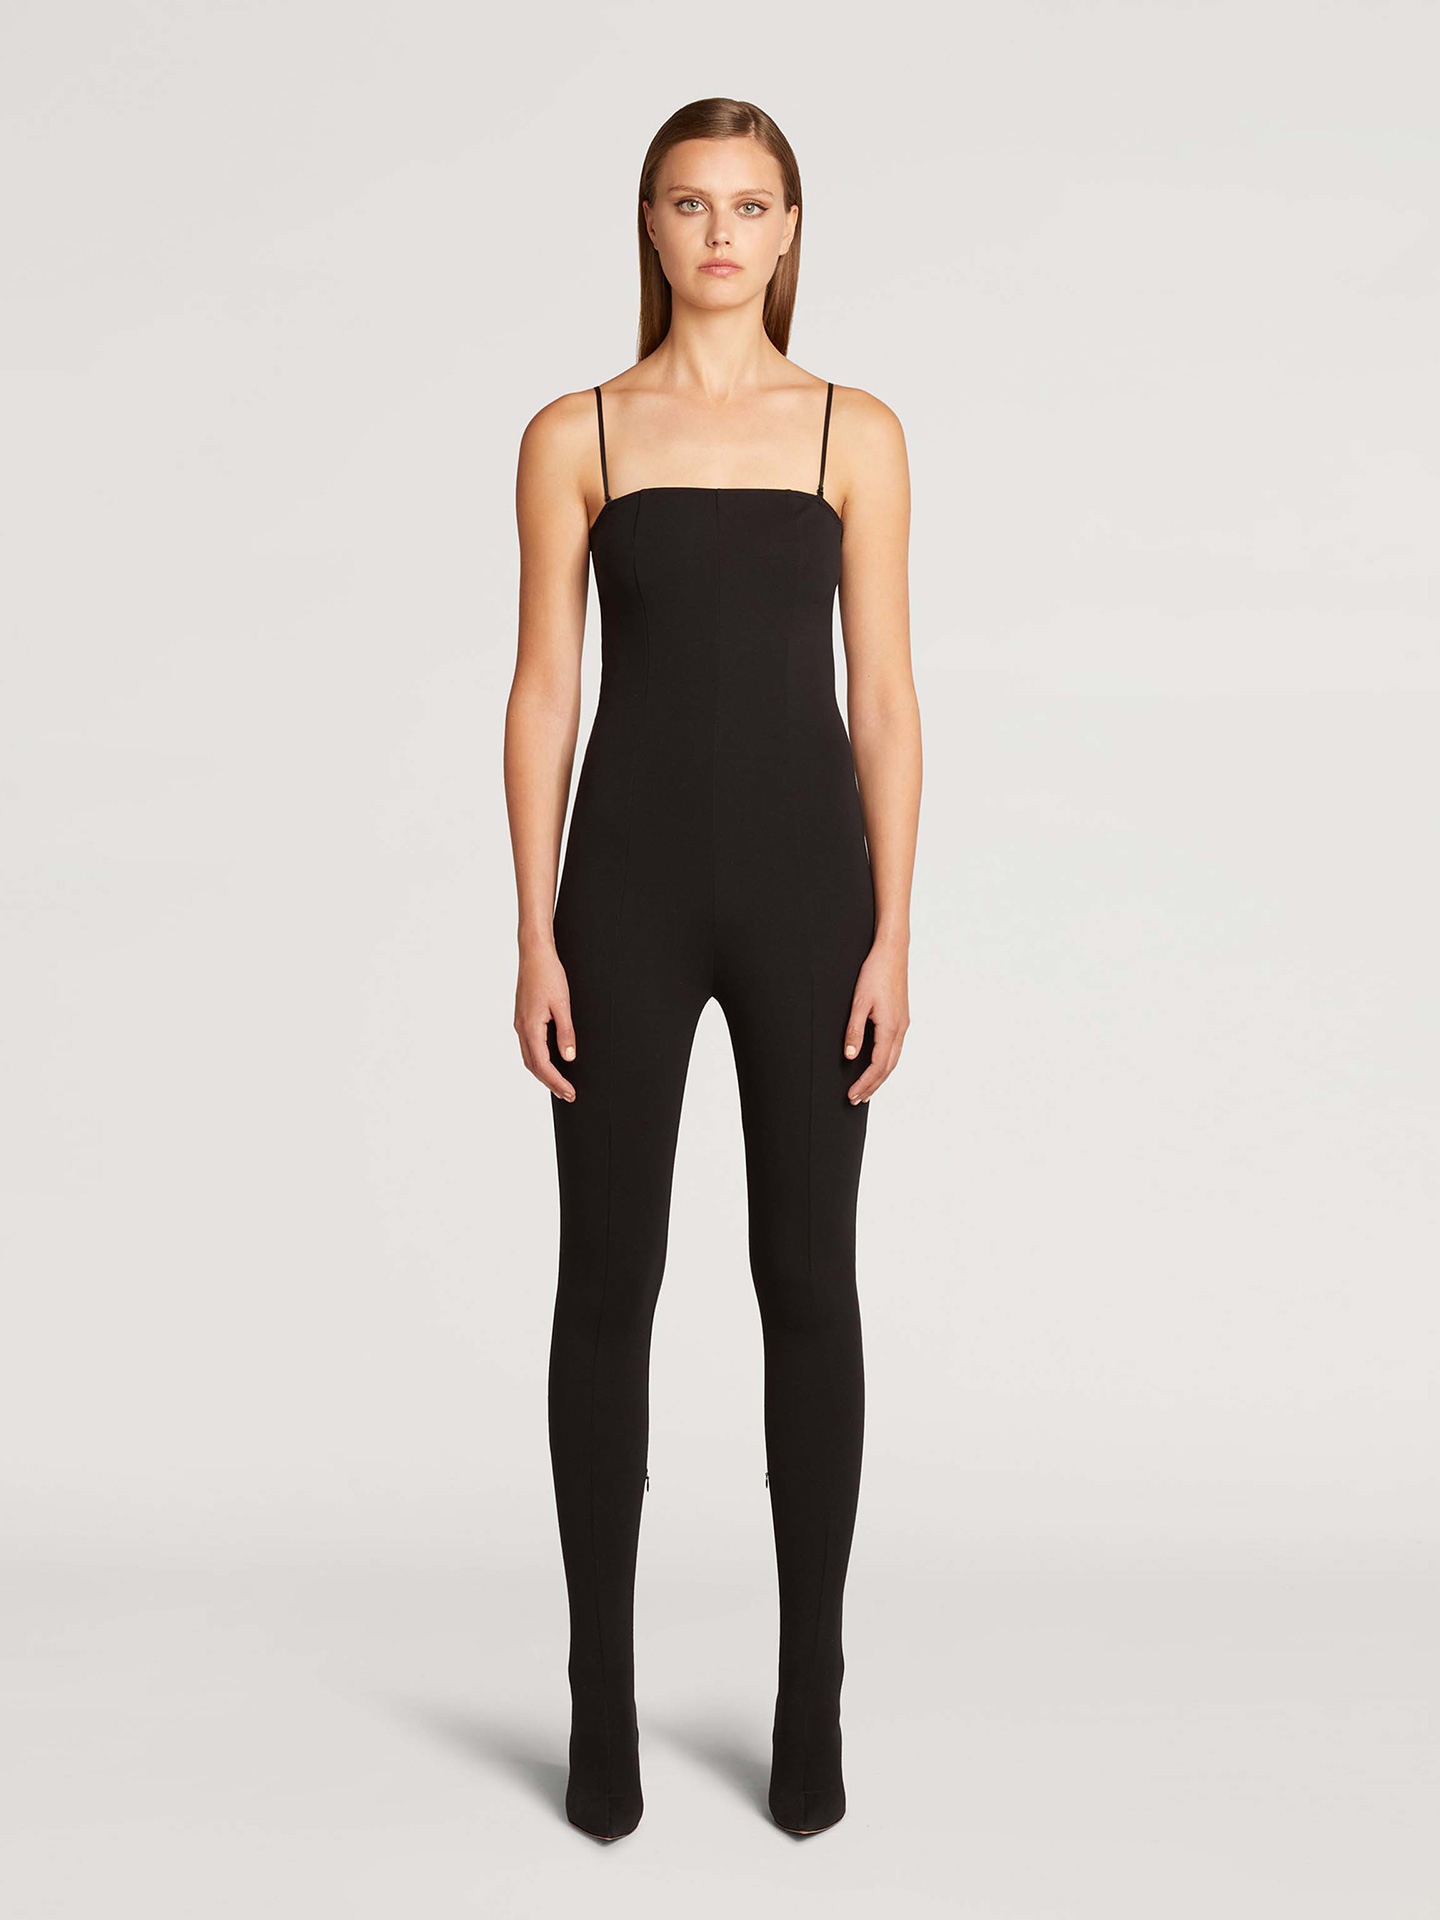 Wolford - Catsuit with shoes, Frau, black, Größe: XS41 von Wolford